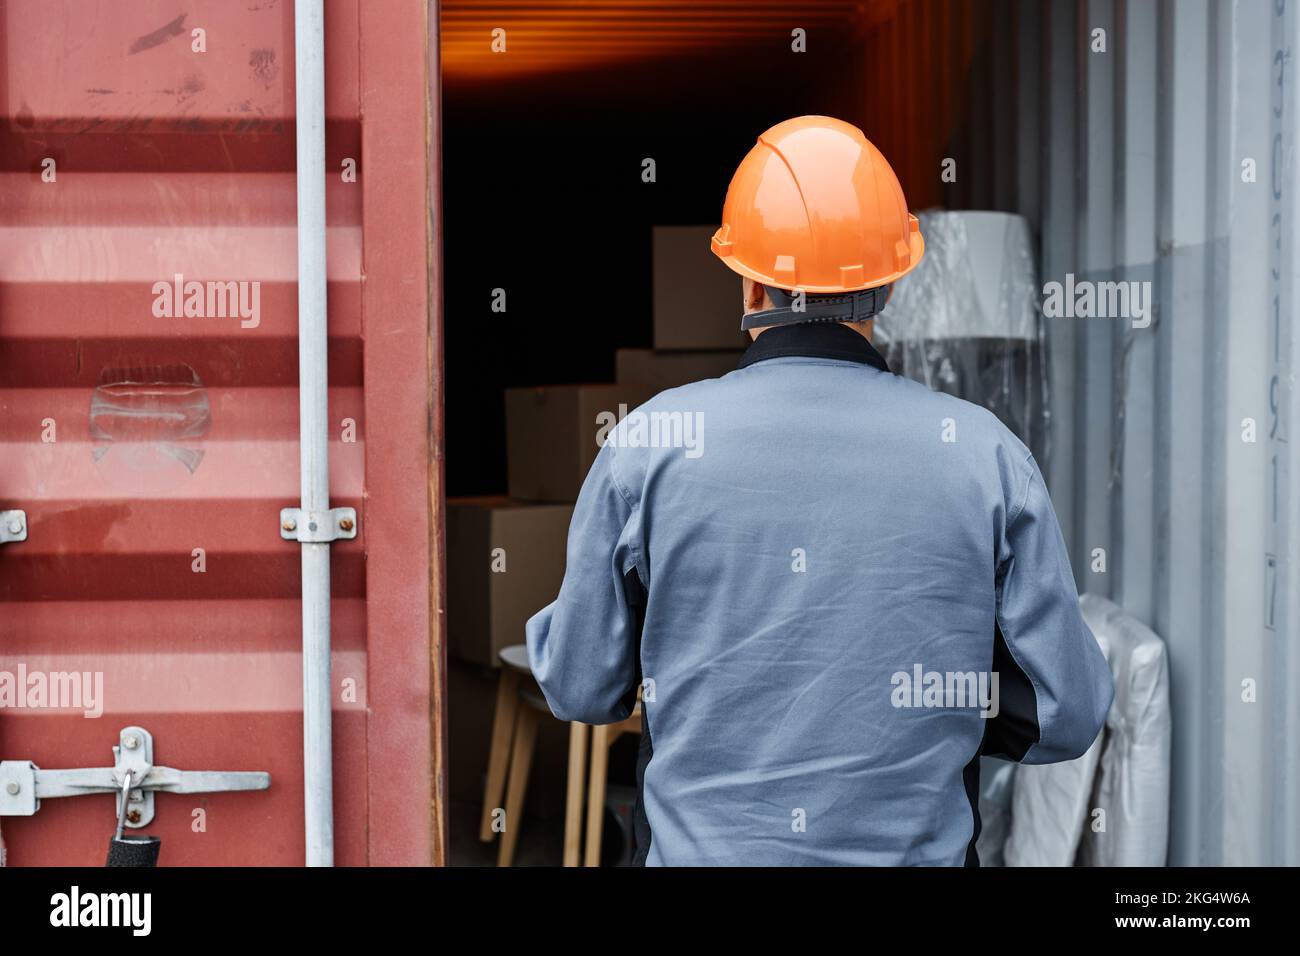 Graphic back view of worker wearing hardhat checking containers at shipping dock, copy space Stock Photo